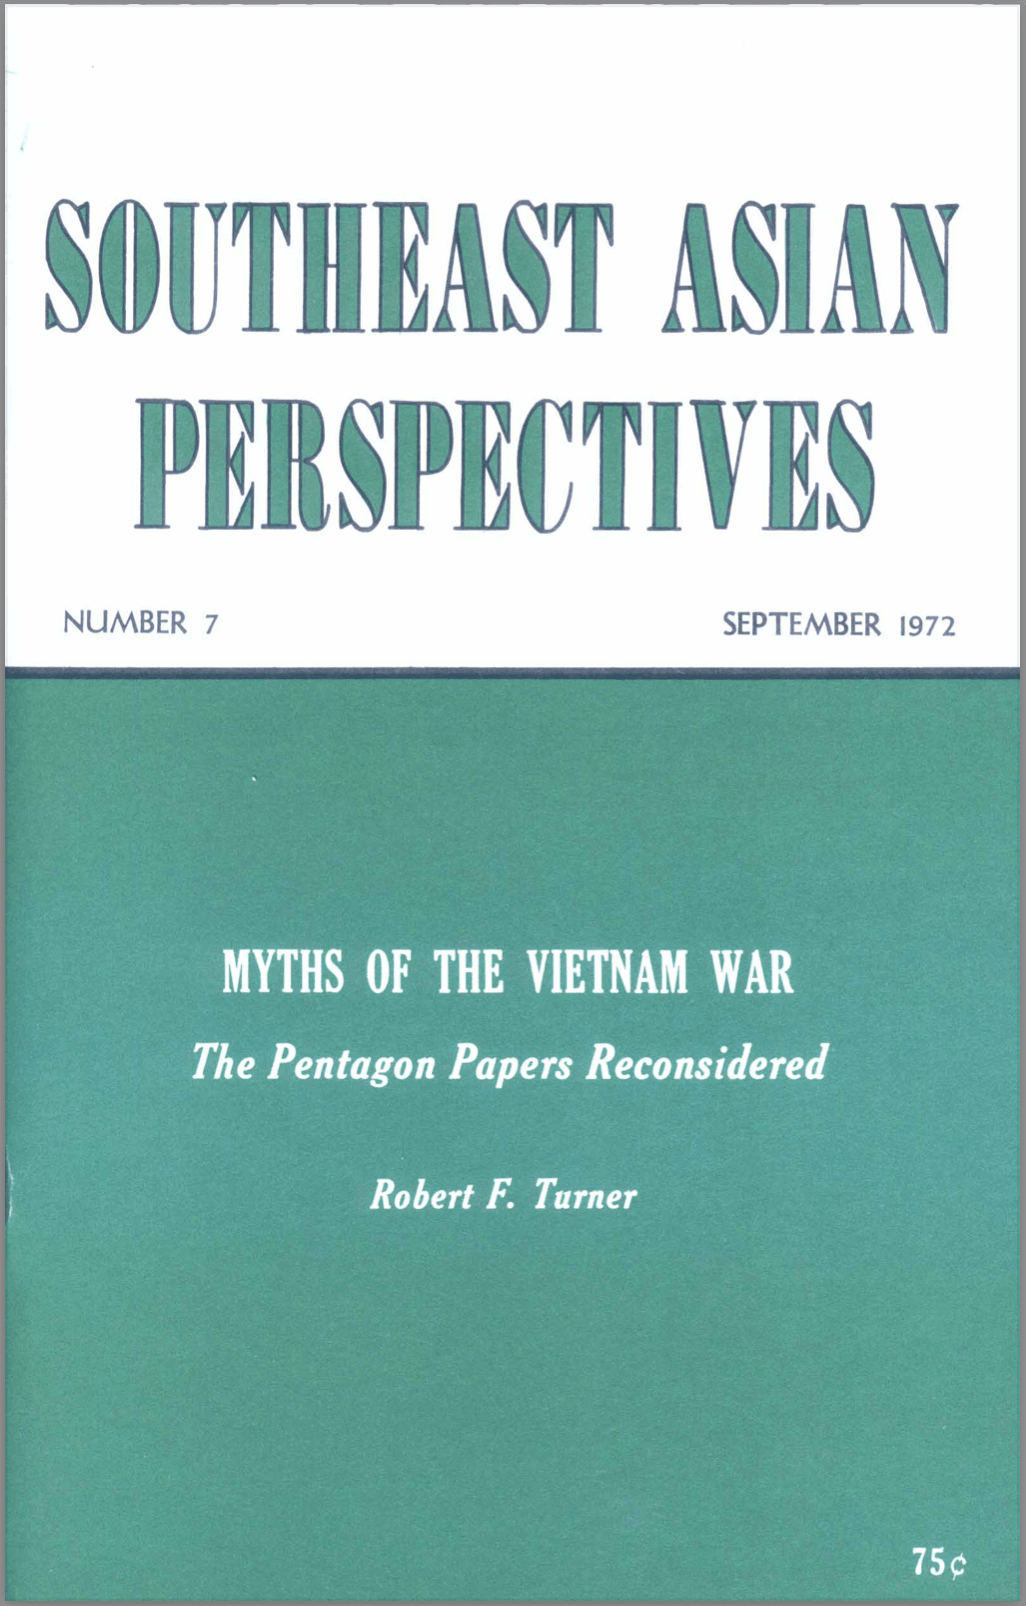 Myths of the VIetnam War: The Pentagon Papers Reconsidered